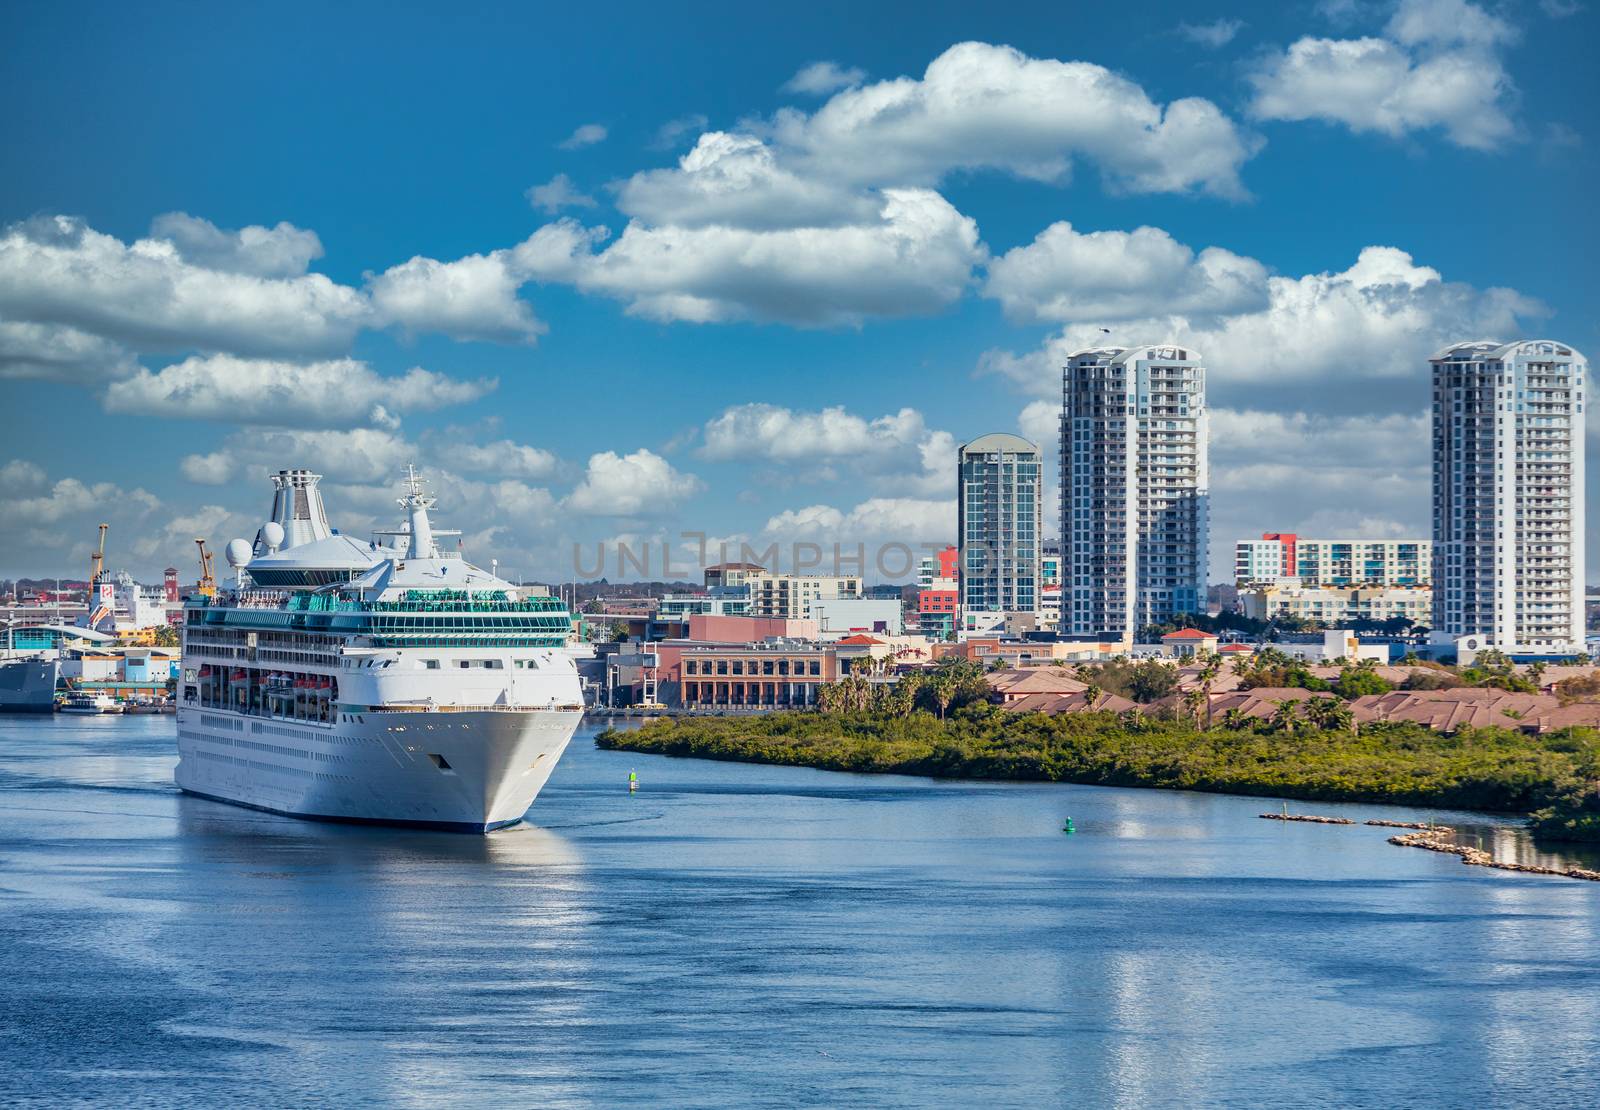 Cruise Ship in Channel Near Tampa leaving port